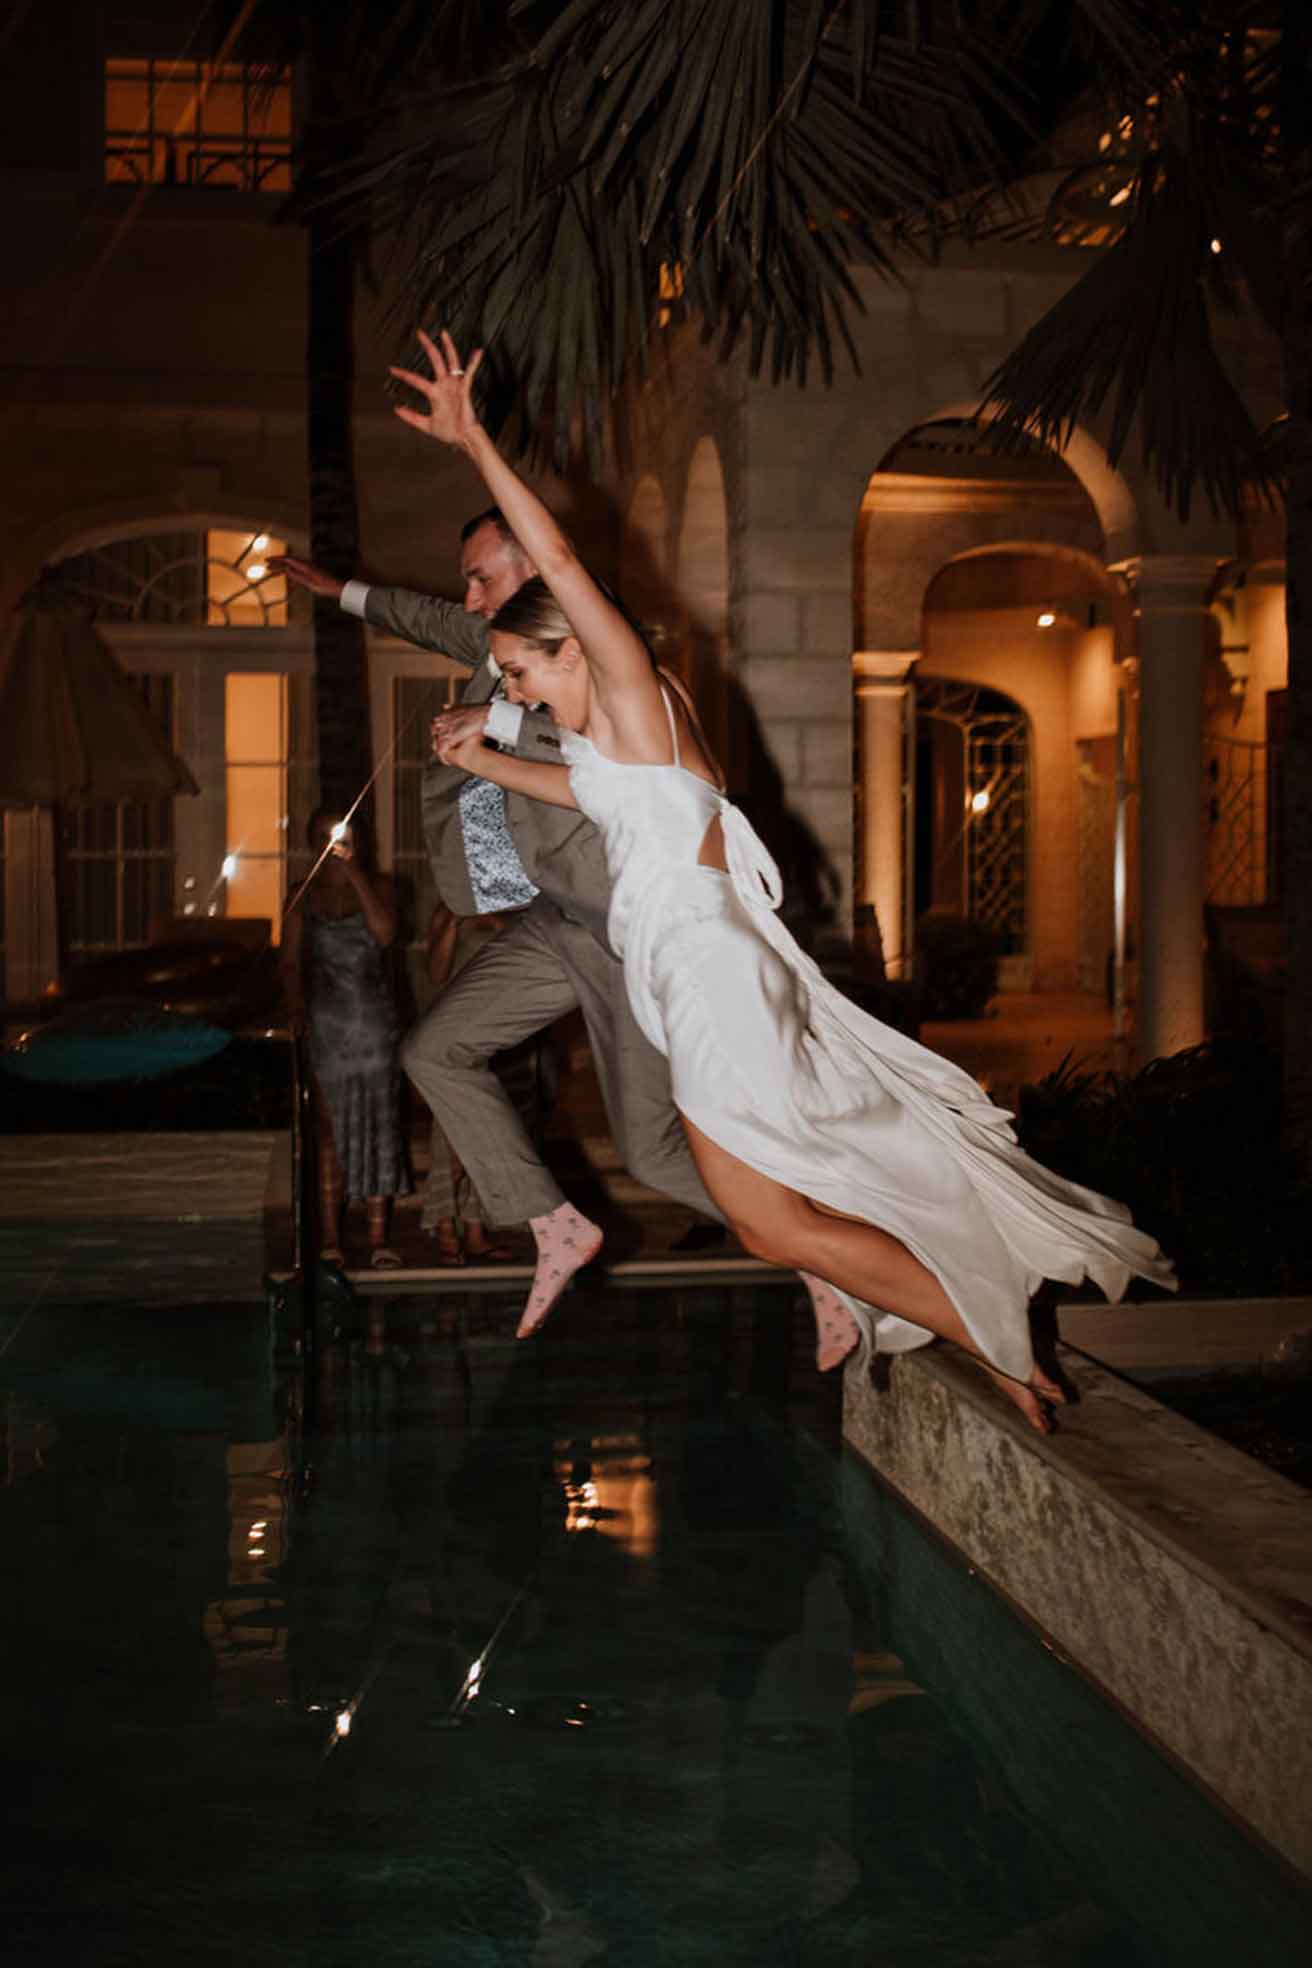 Bride and Groom jumping into pool